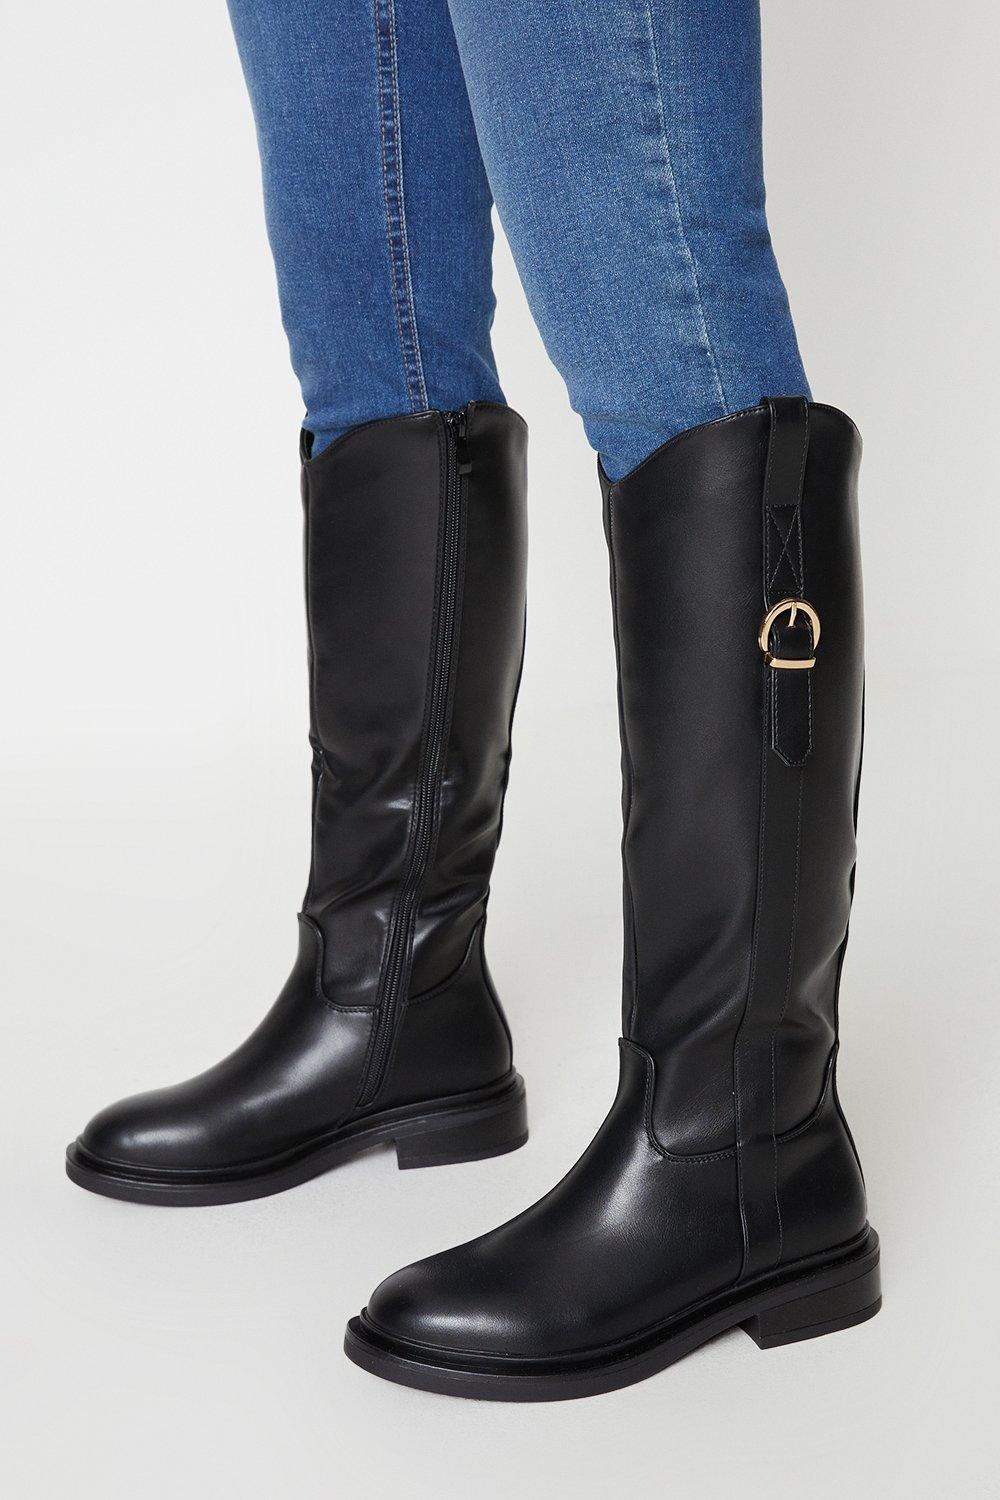 Womens Kampus Knee High Riding Boots